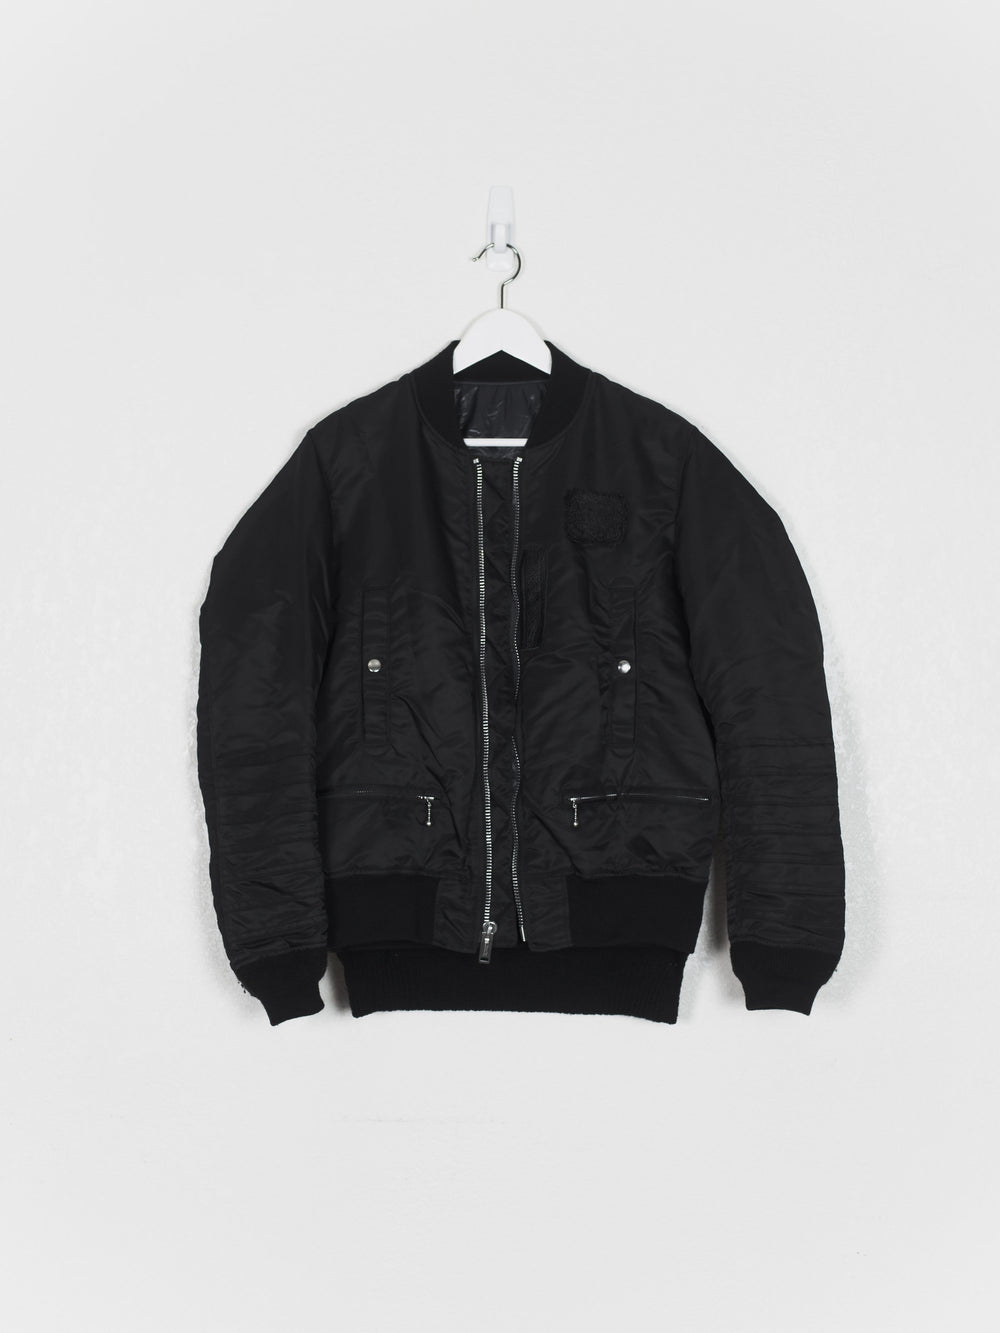 Undercover AW13 Ribcage MA-1 Bomber